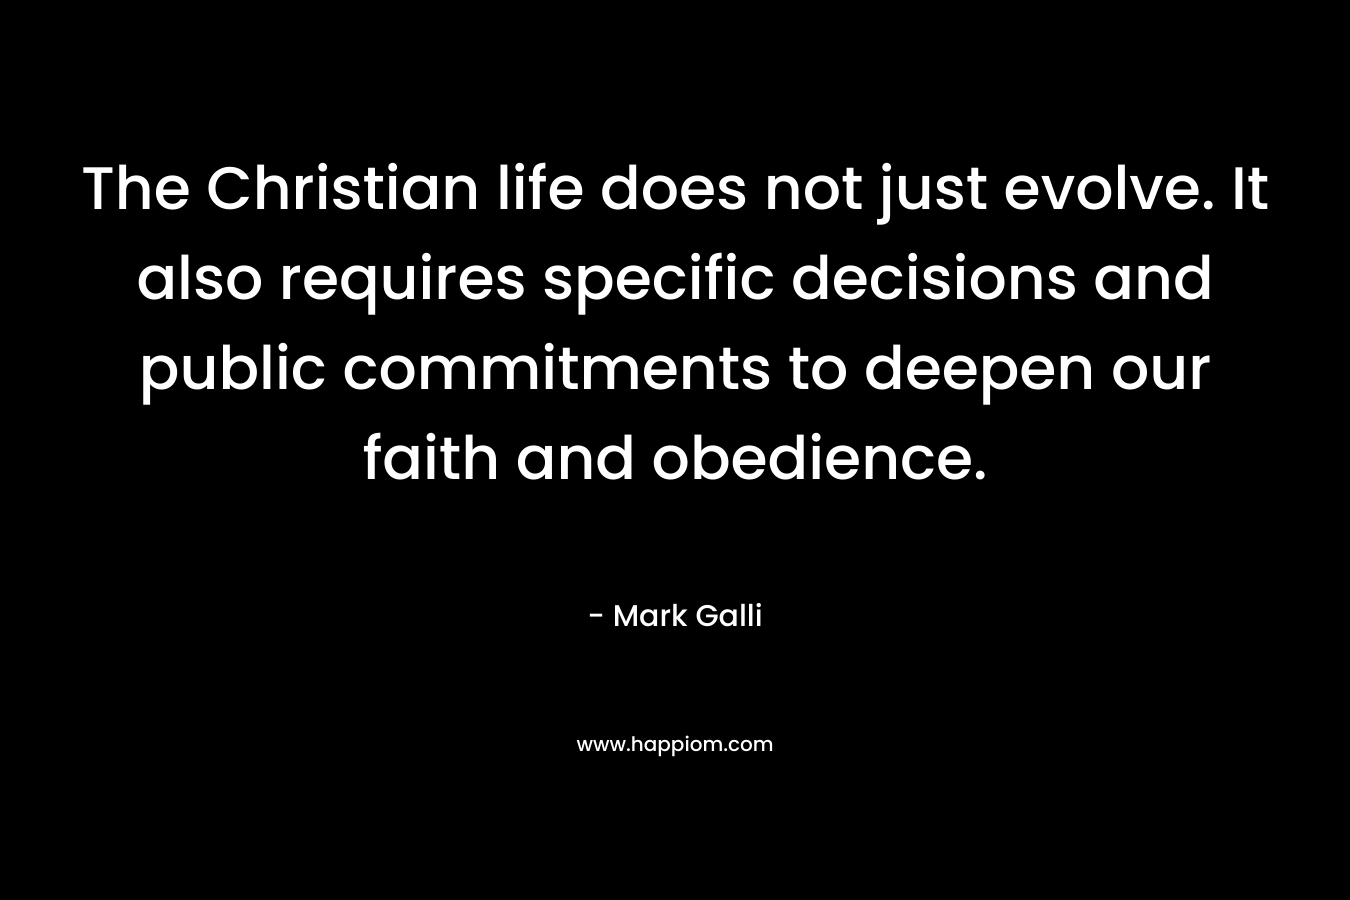 The Christian life does not just evolve. It also requires specific decisions and public commitments to deepen our faith and obedience. – Mark Galli